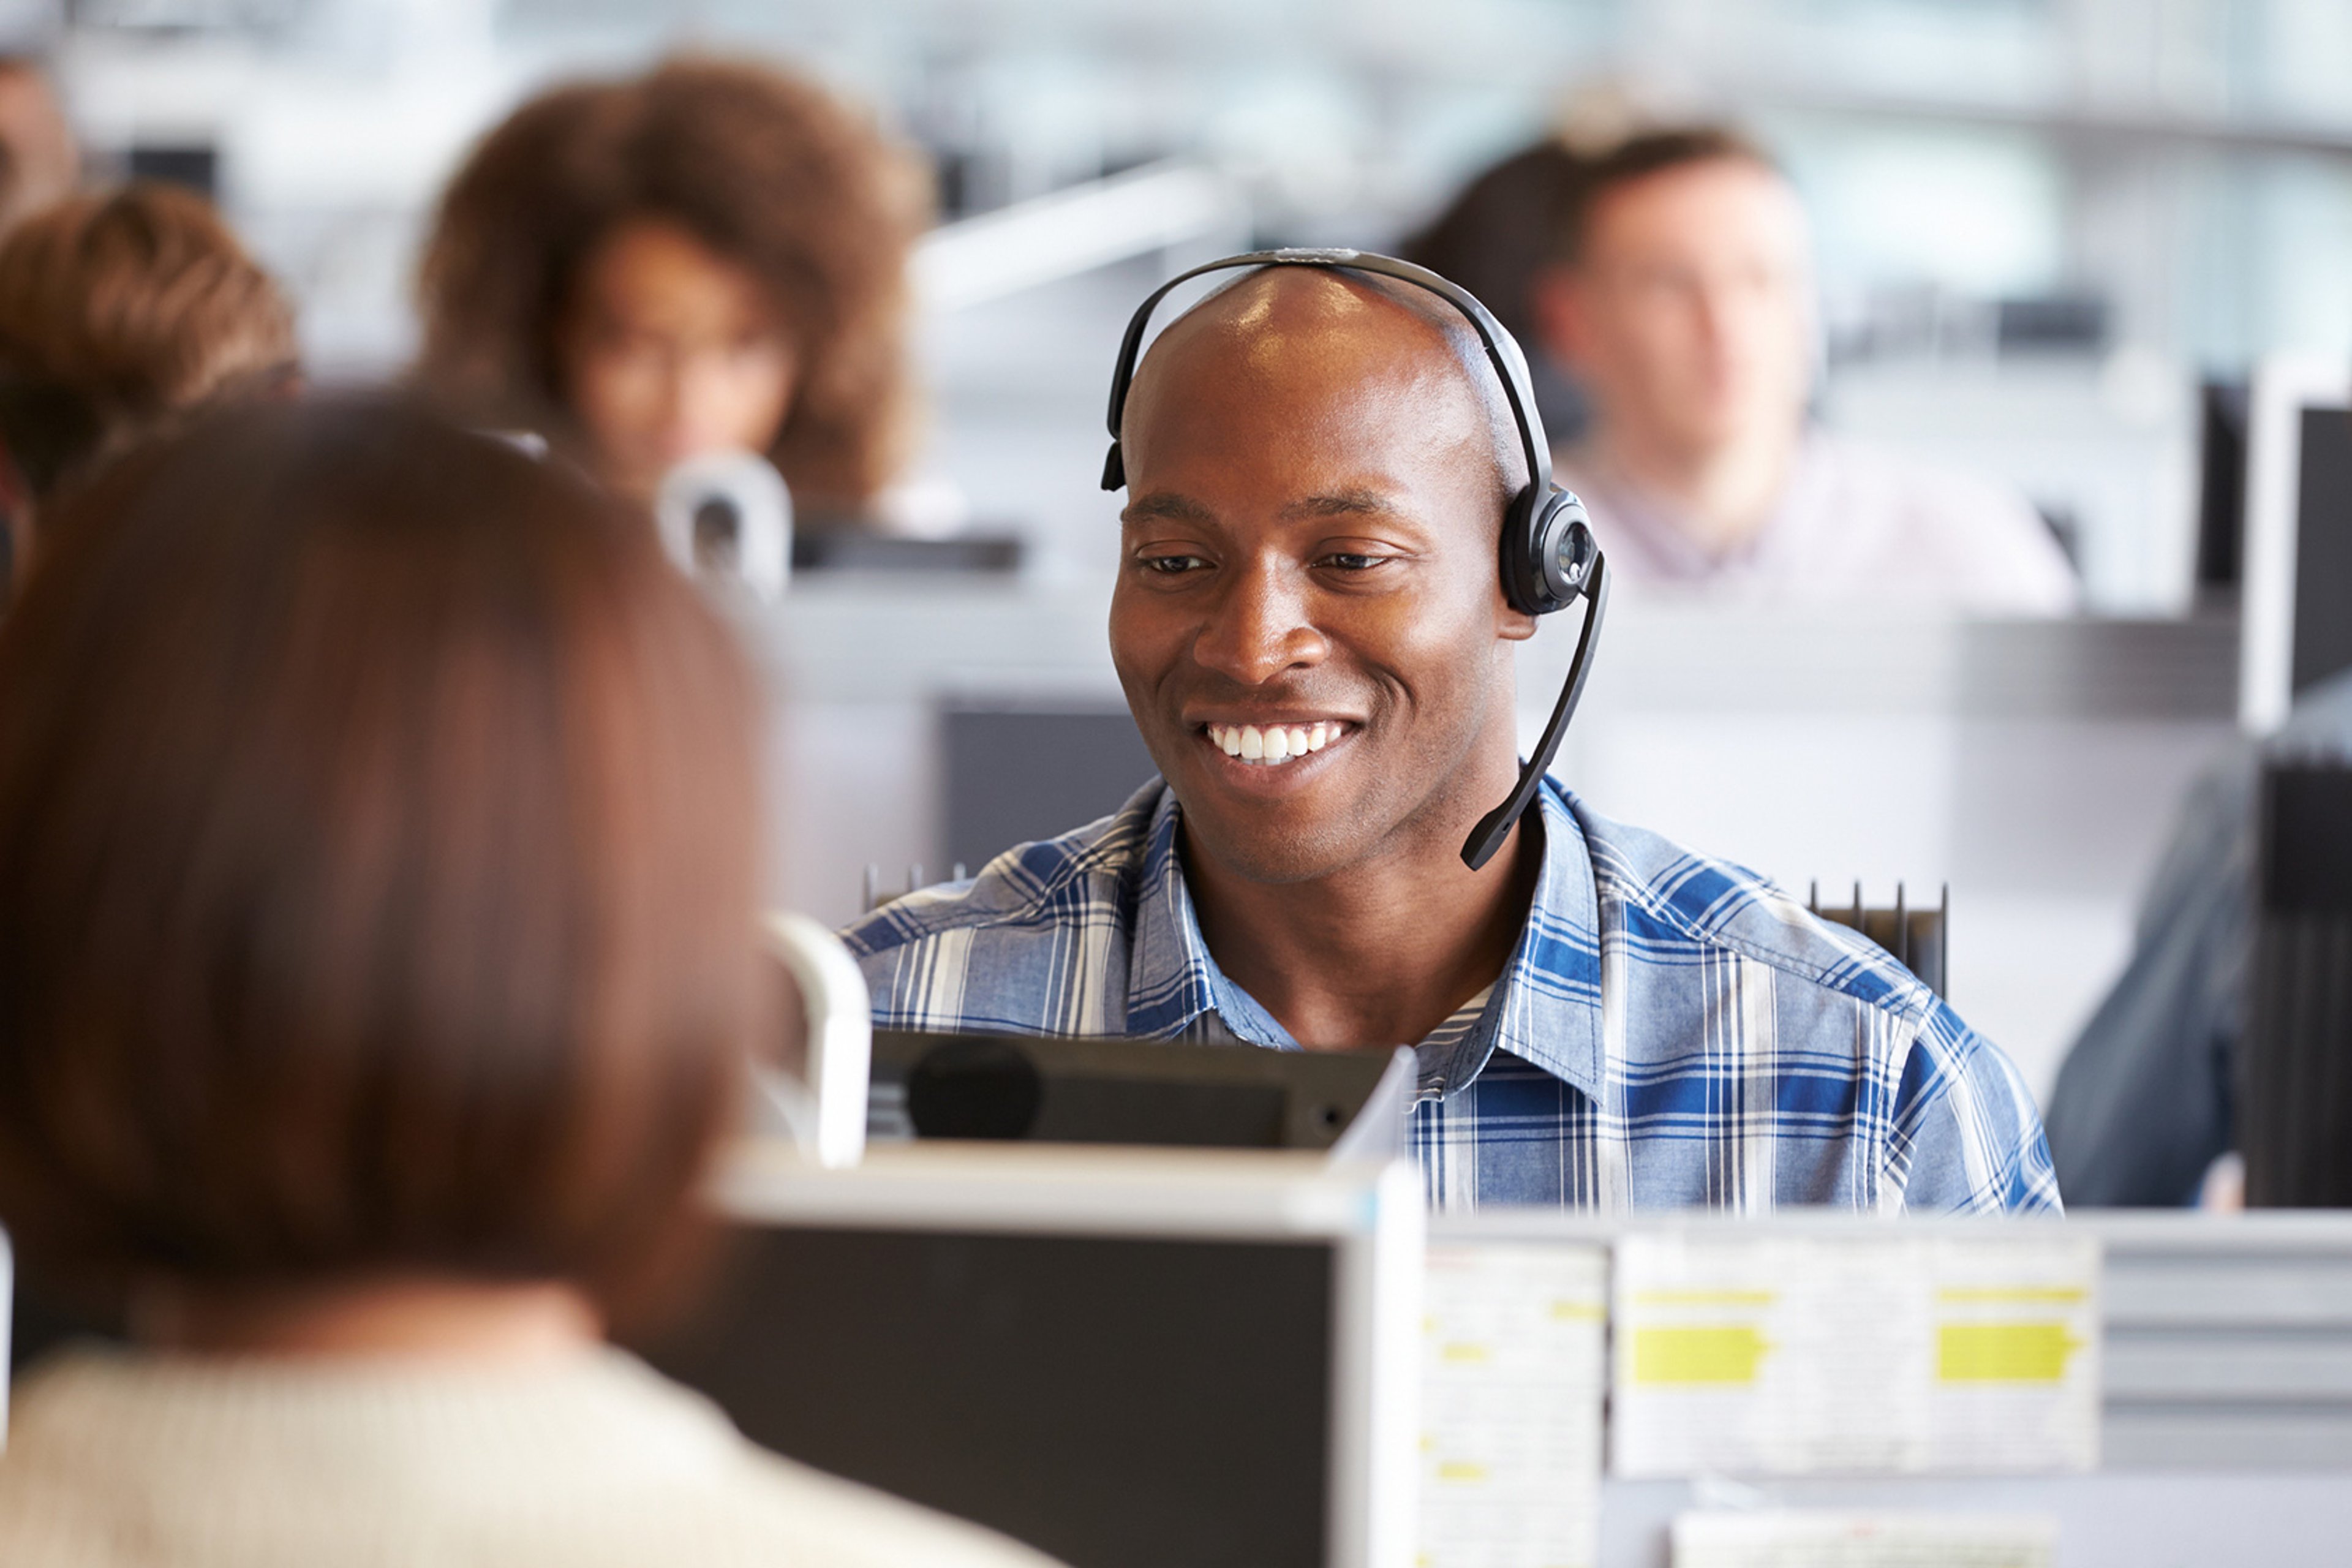 Smiling man with a headset working in a call center